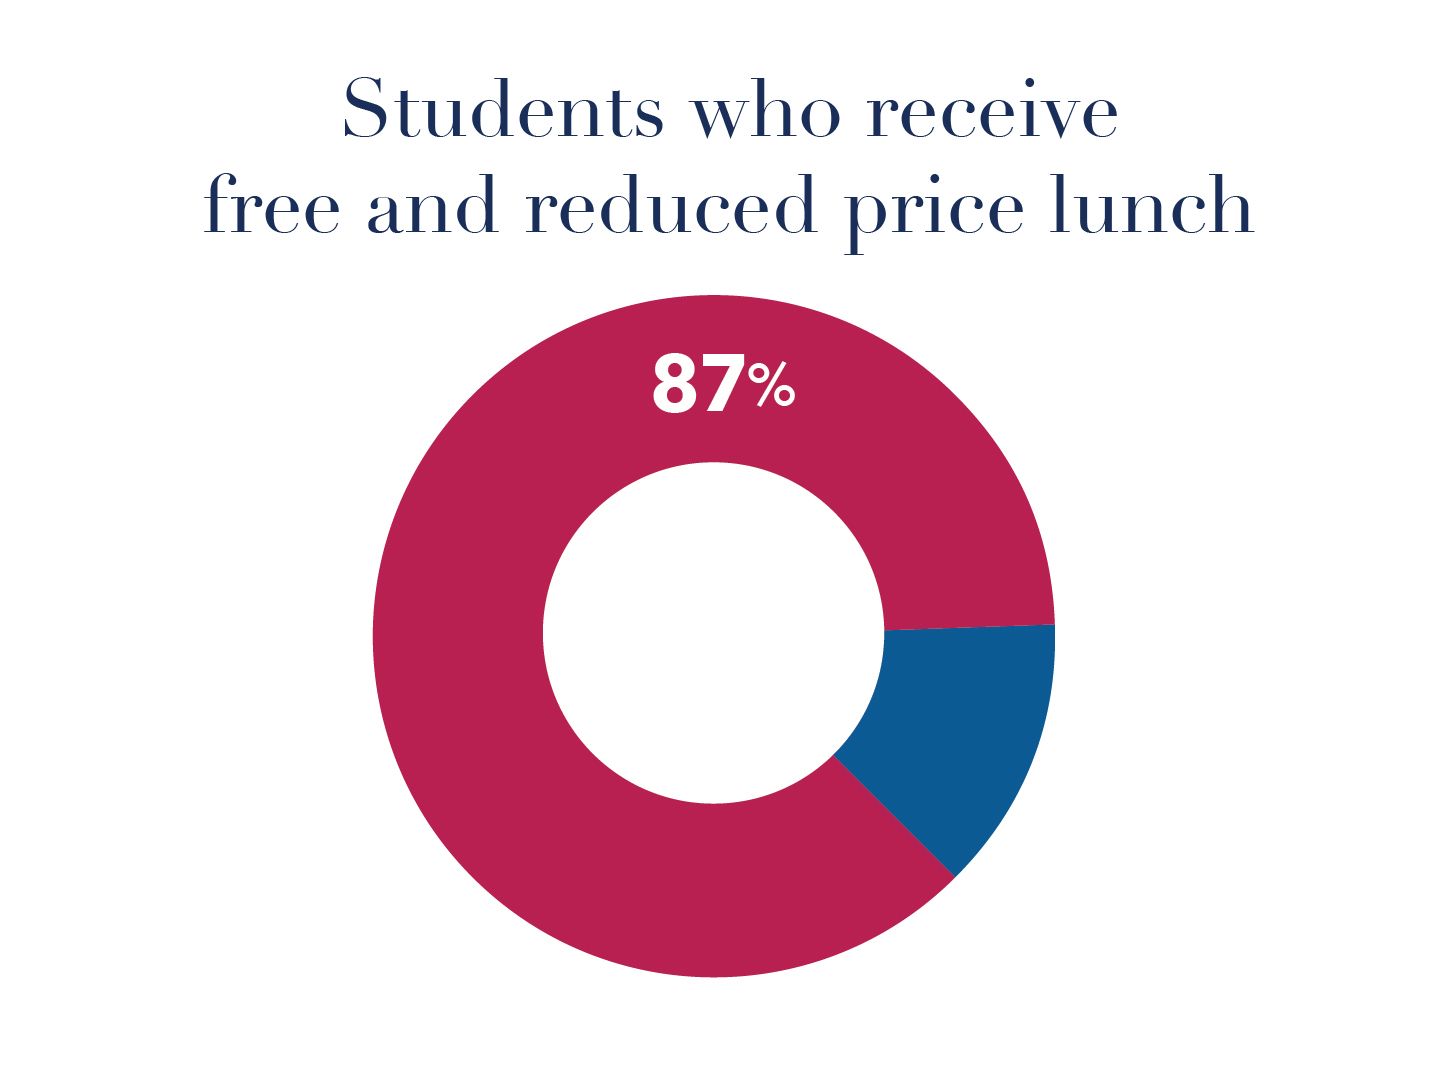 Students who receive free and reduced price lunch